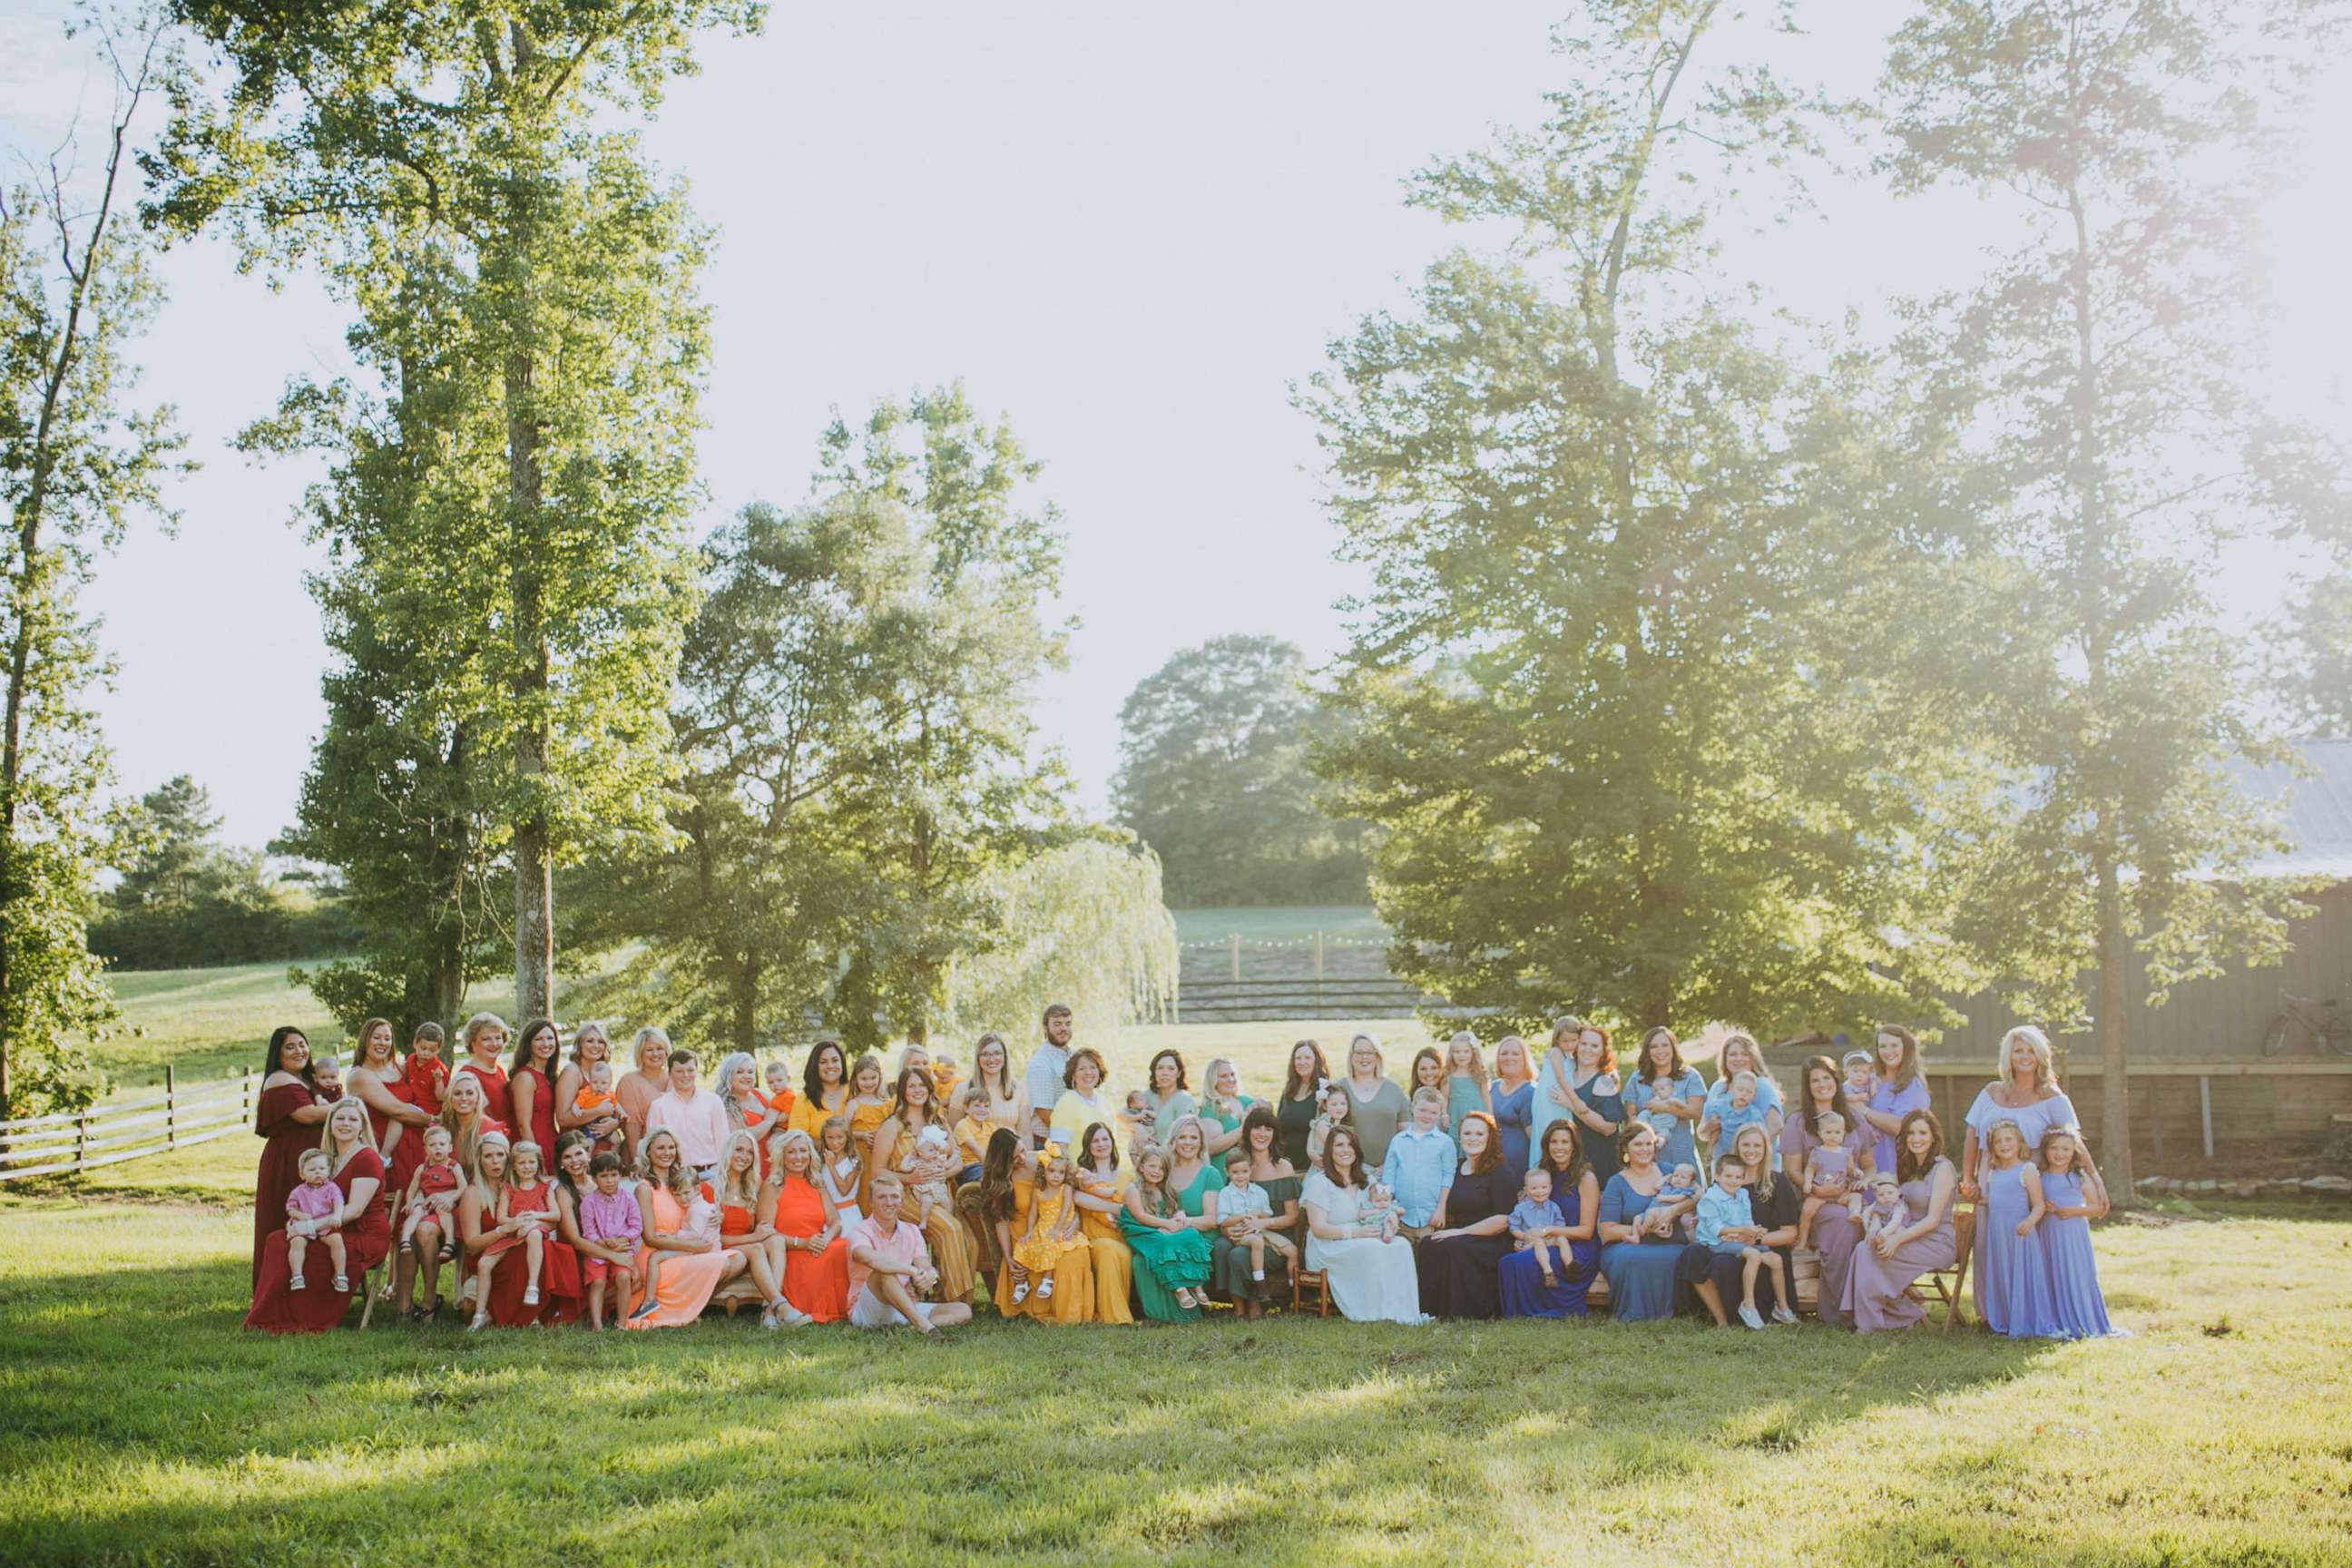 PHOTO: A group of 40 women who experienced miscarriages, gathered with their children for a photo shoot July 21, in Alabama to spread hope to other parents who went through the loss of a pregnancy.